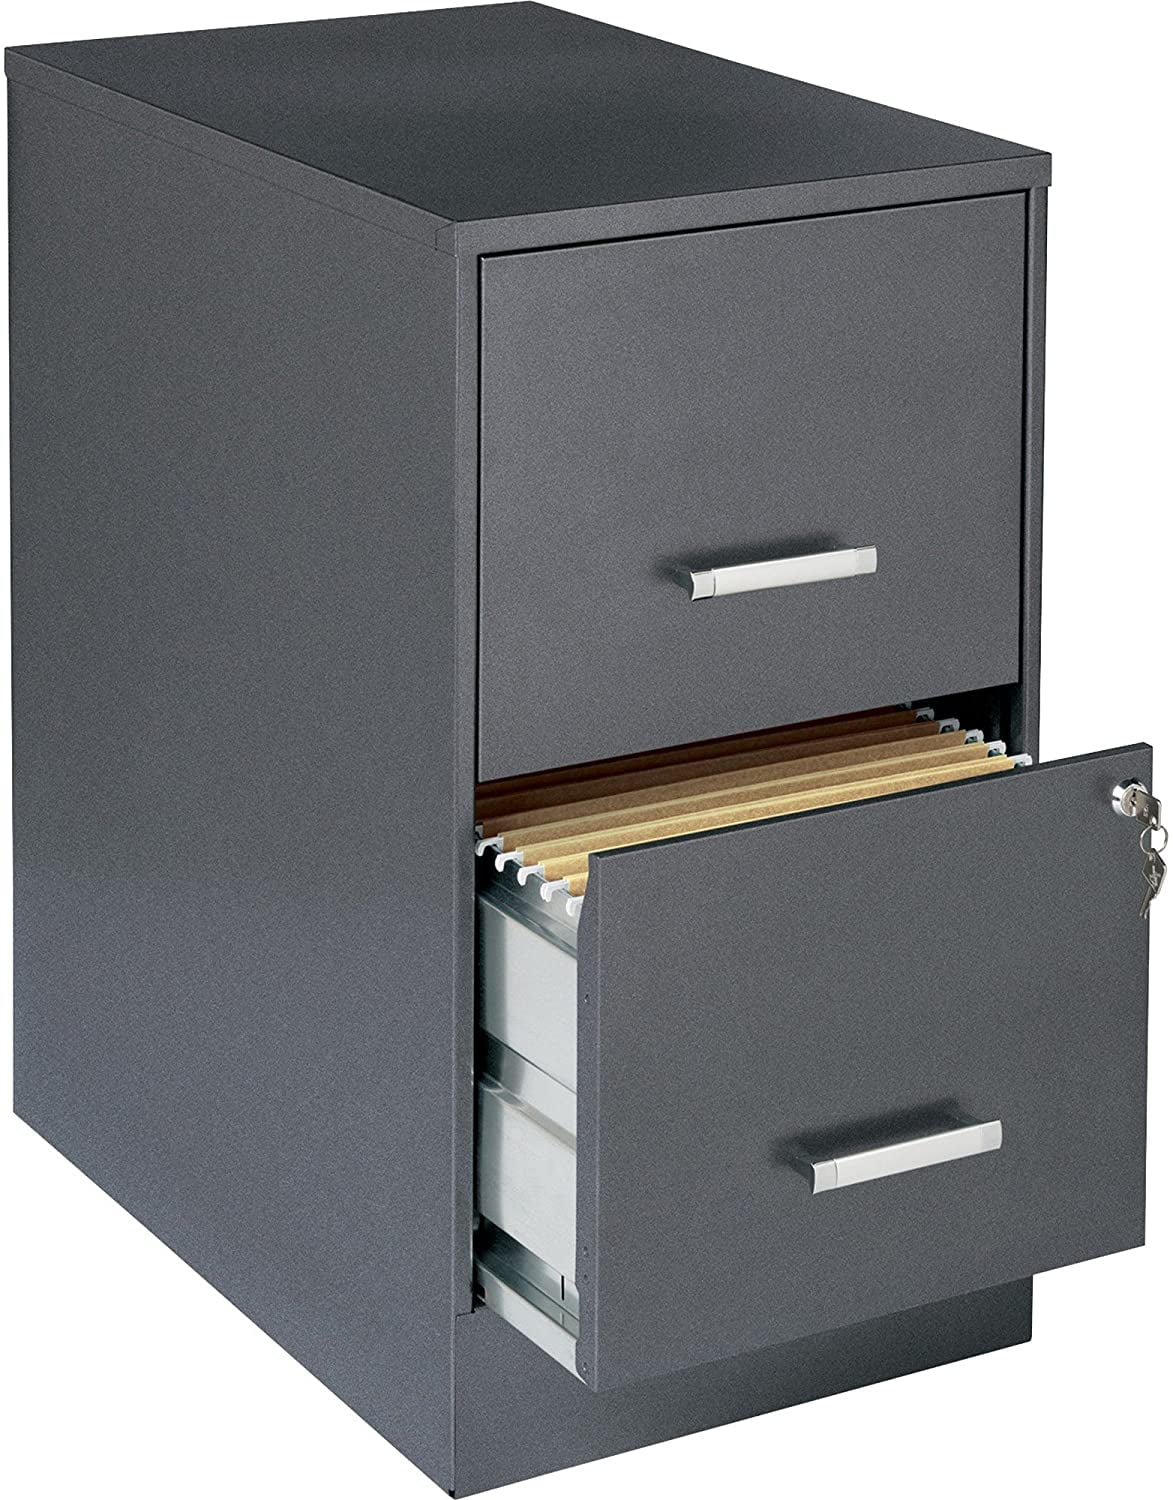 Putty Gray Letter Lorell 2 Drawers Vertical Steel Lockable Filing Cabinet 